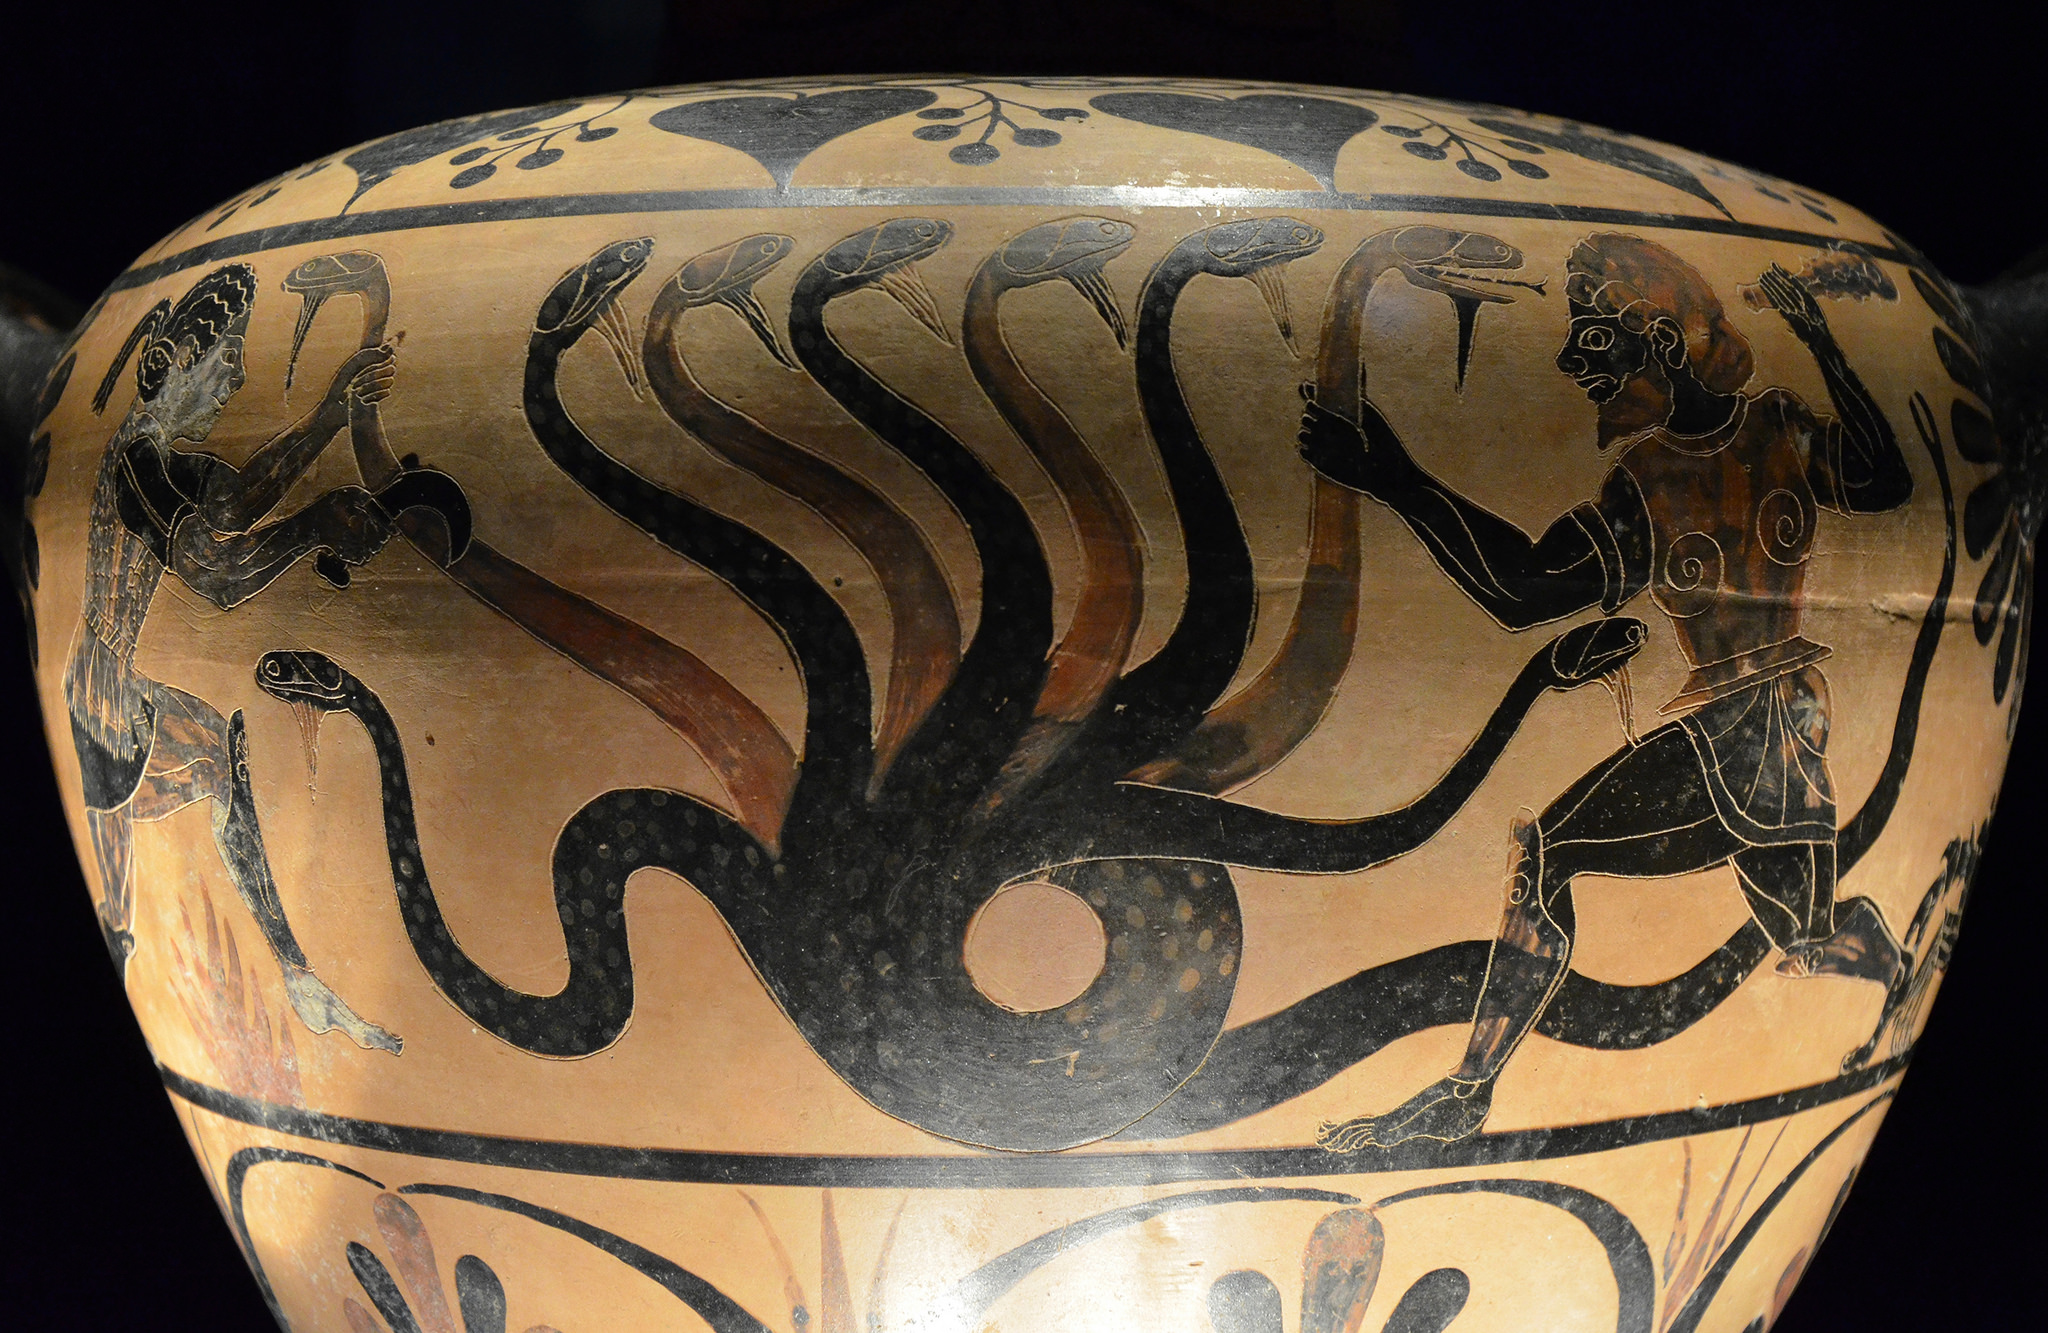 Hercules and the Lernaean Hydra, from Etruria, attributed to the Painter of Aquila, 530-500 BCE. By Carole Raddato, 2014, under Creative Commons Attribution-ShareAlike.